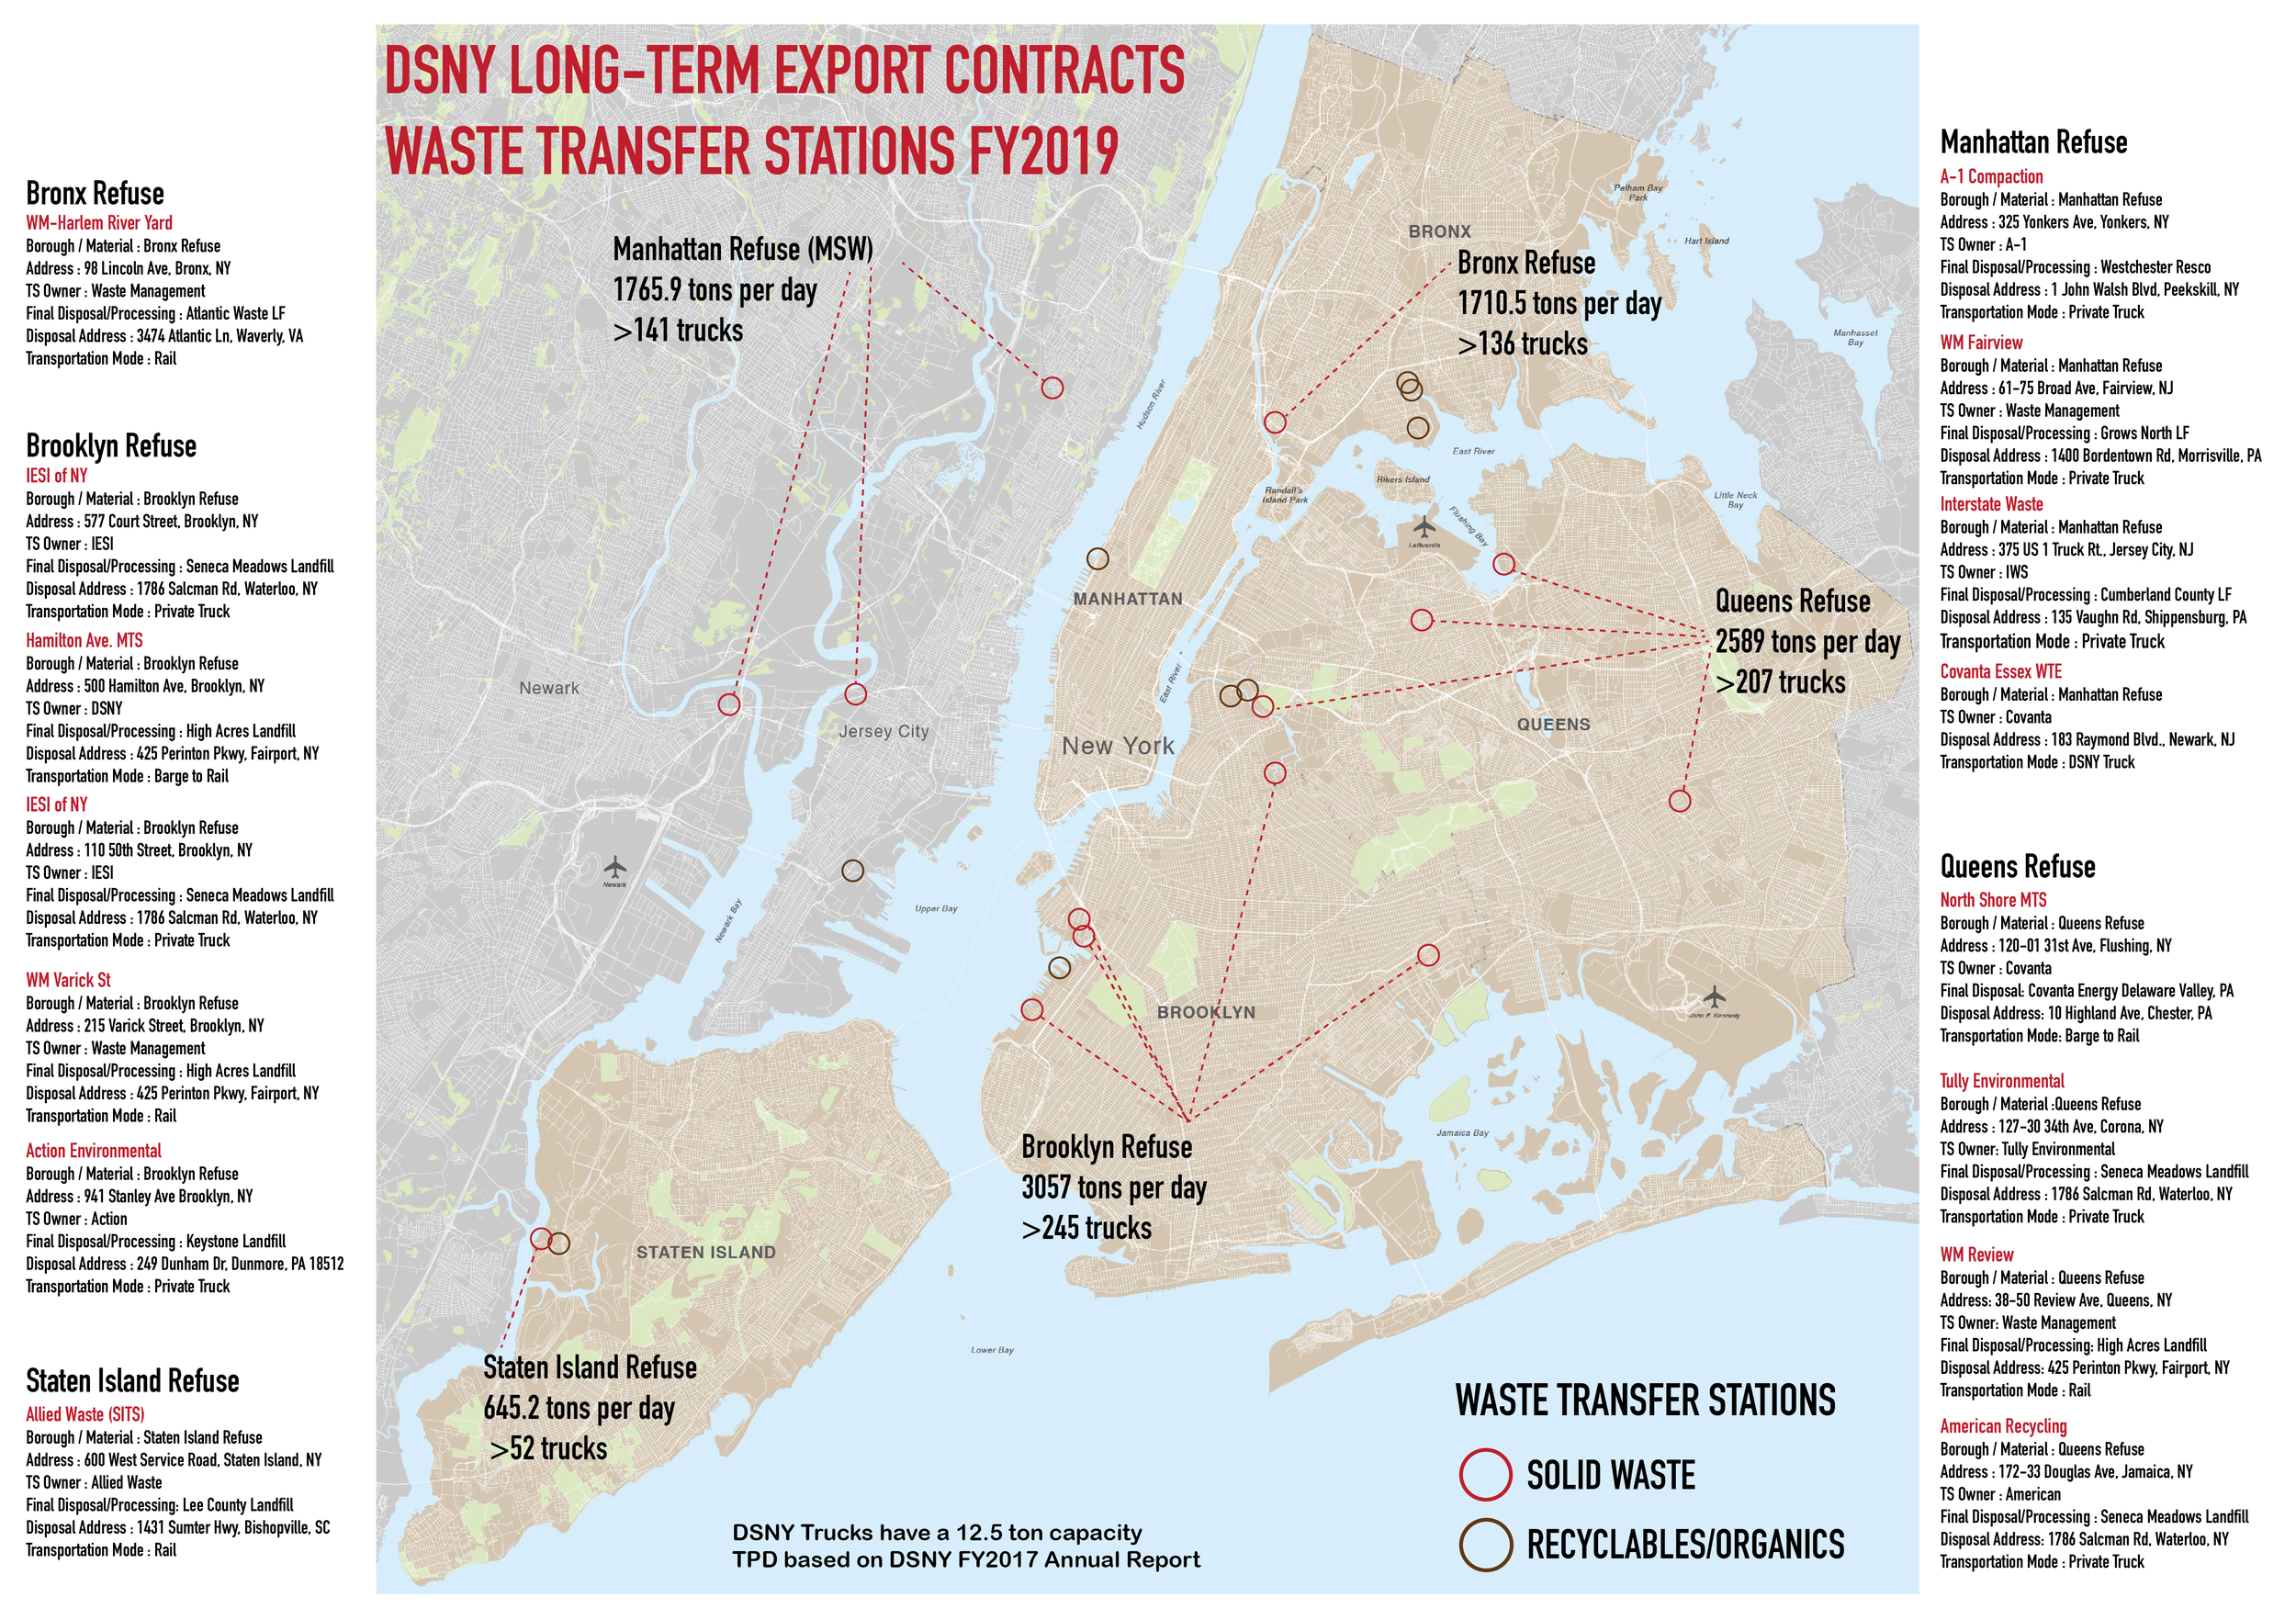 Projected TPD from DSNY FY2019 Data, Thesis, M.A. Theories of Urban Practice, "Exporting Accountability: Injustice in New York City’s Waste Flows and the Promise of Community-Led Composting"